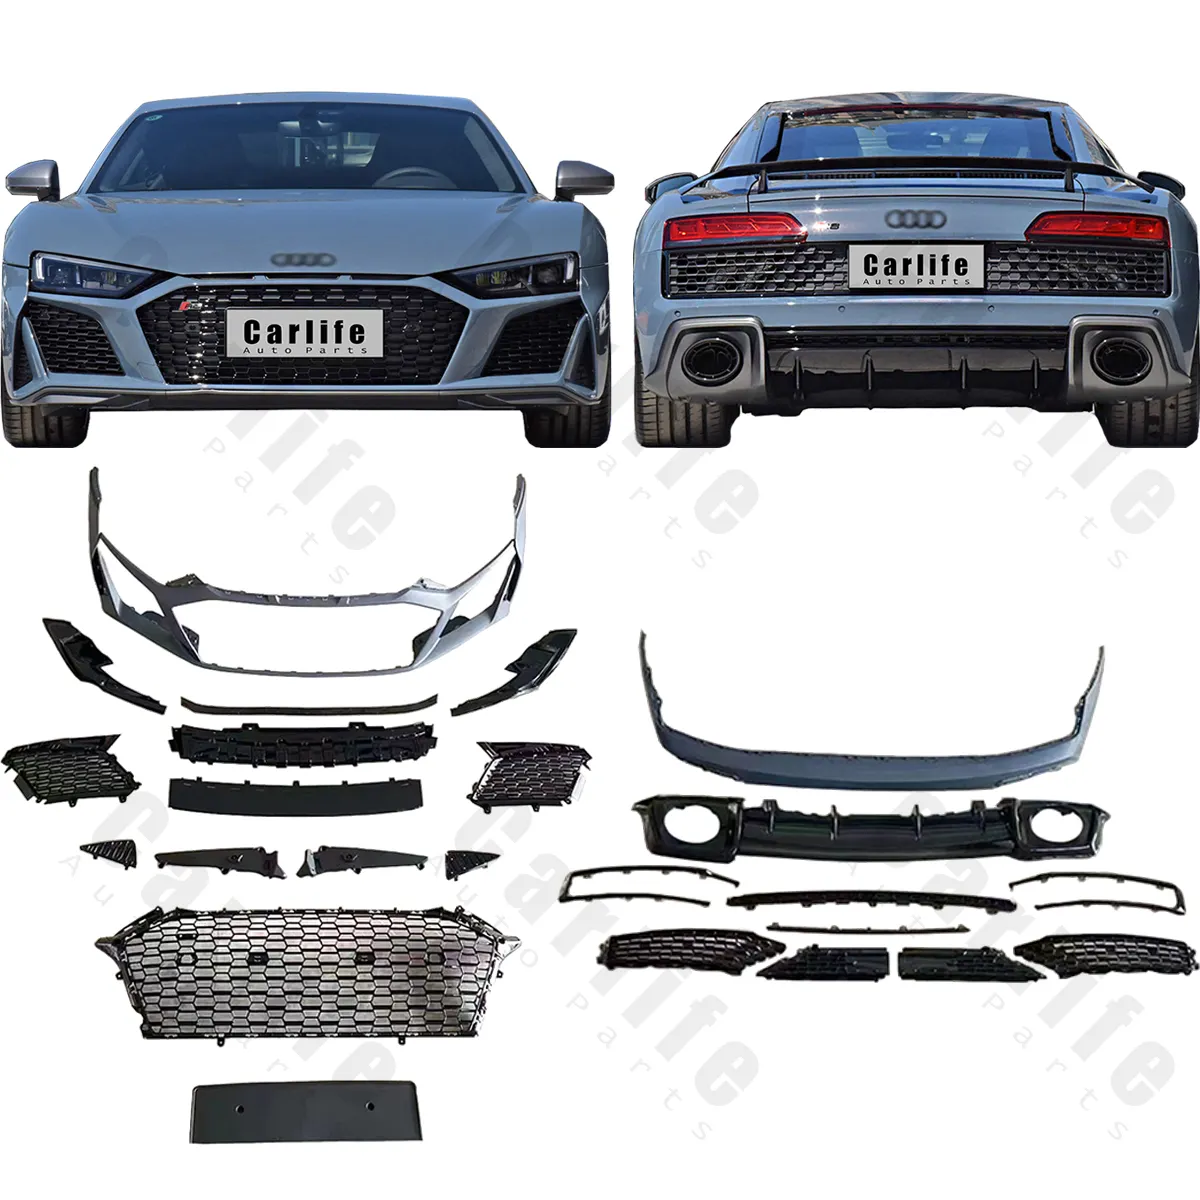 New product conversion Body kit for Audi R8 2016 2017 2018 upgrade to 2021 R8 look like bodykit with PP material bumpers